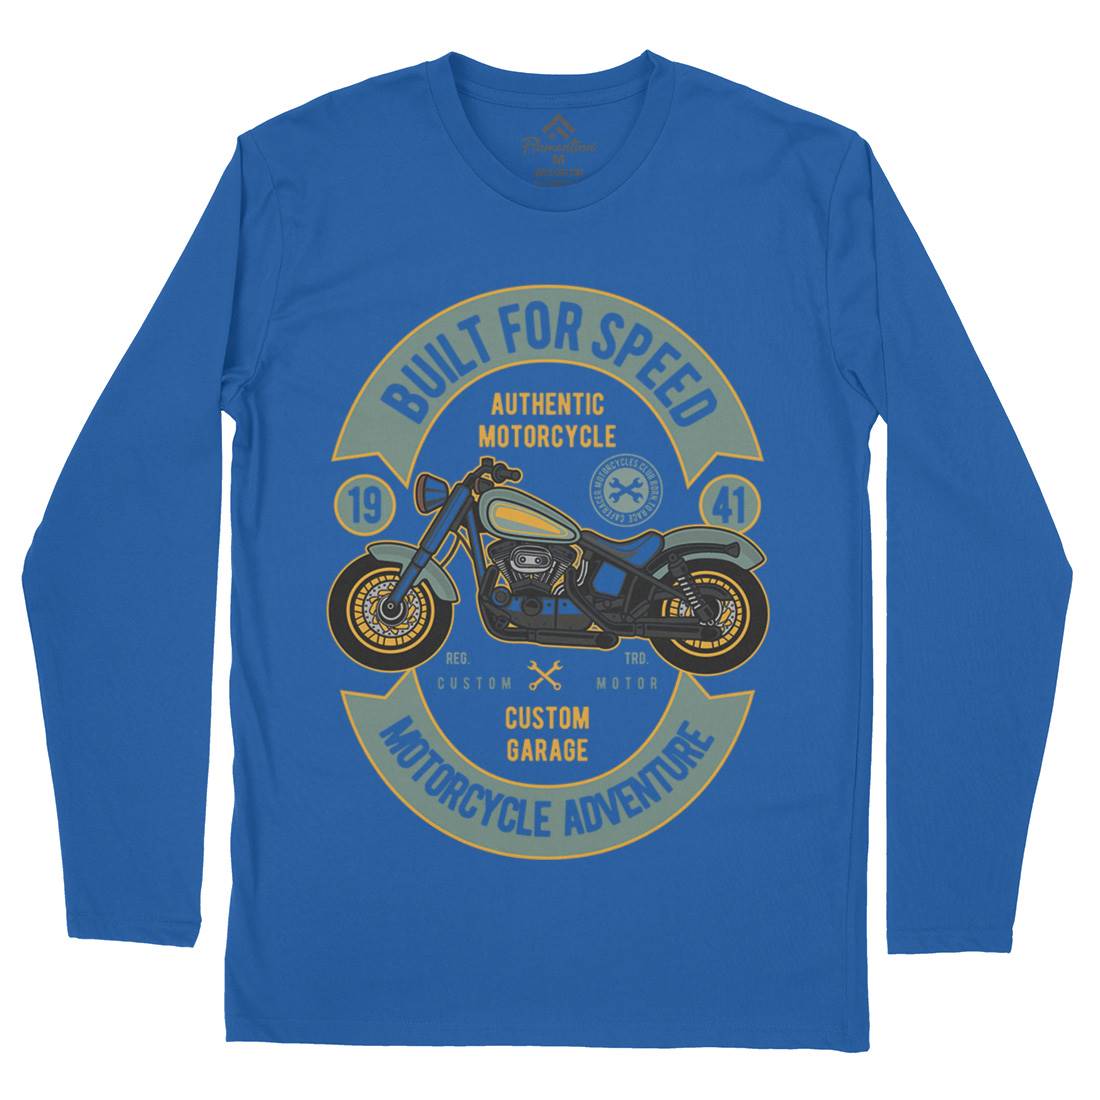 Built For Speed Mens Long Sleeve T-Shirt Motorcycles D512